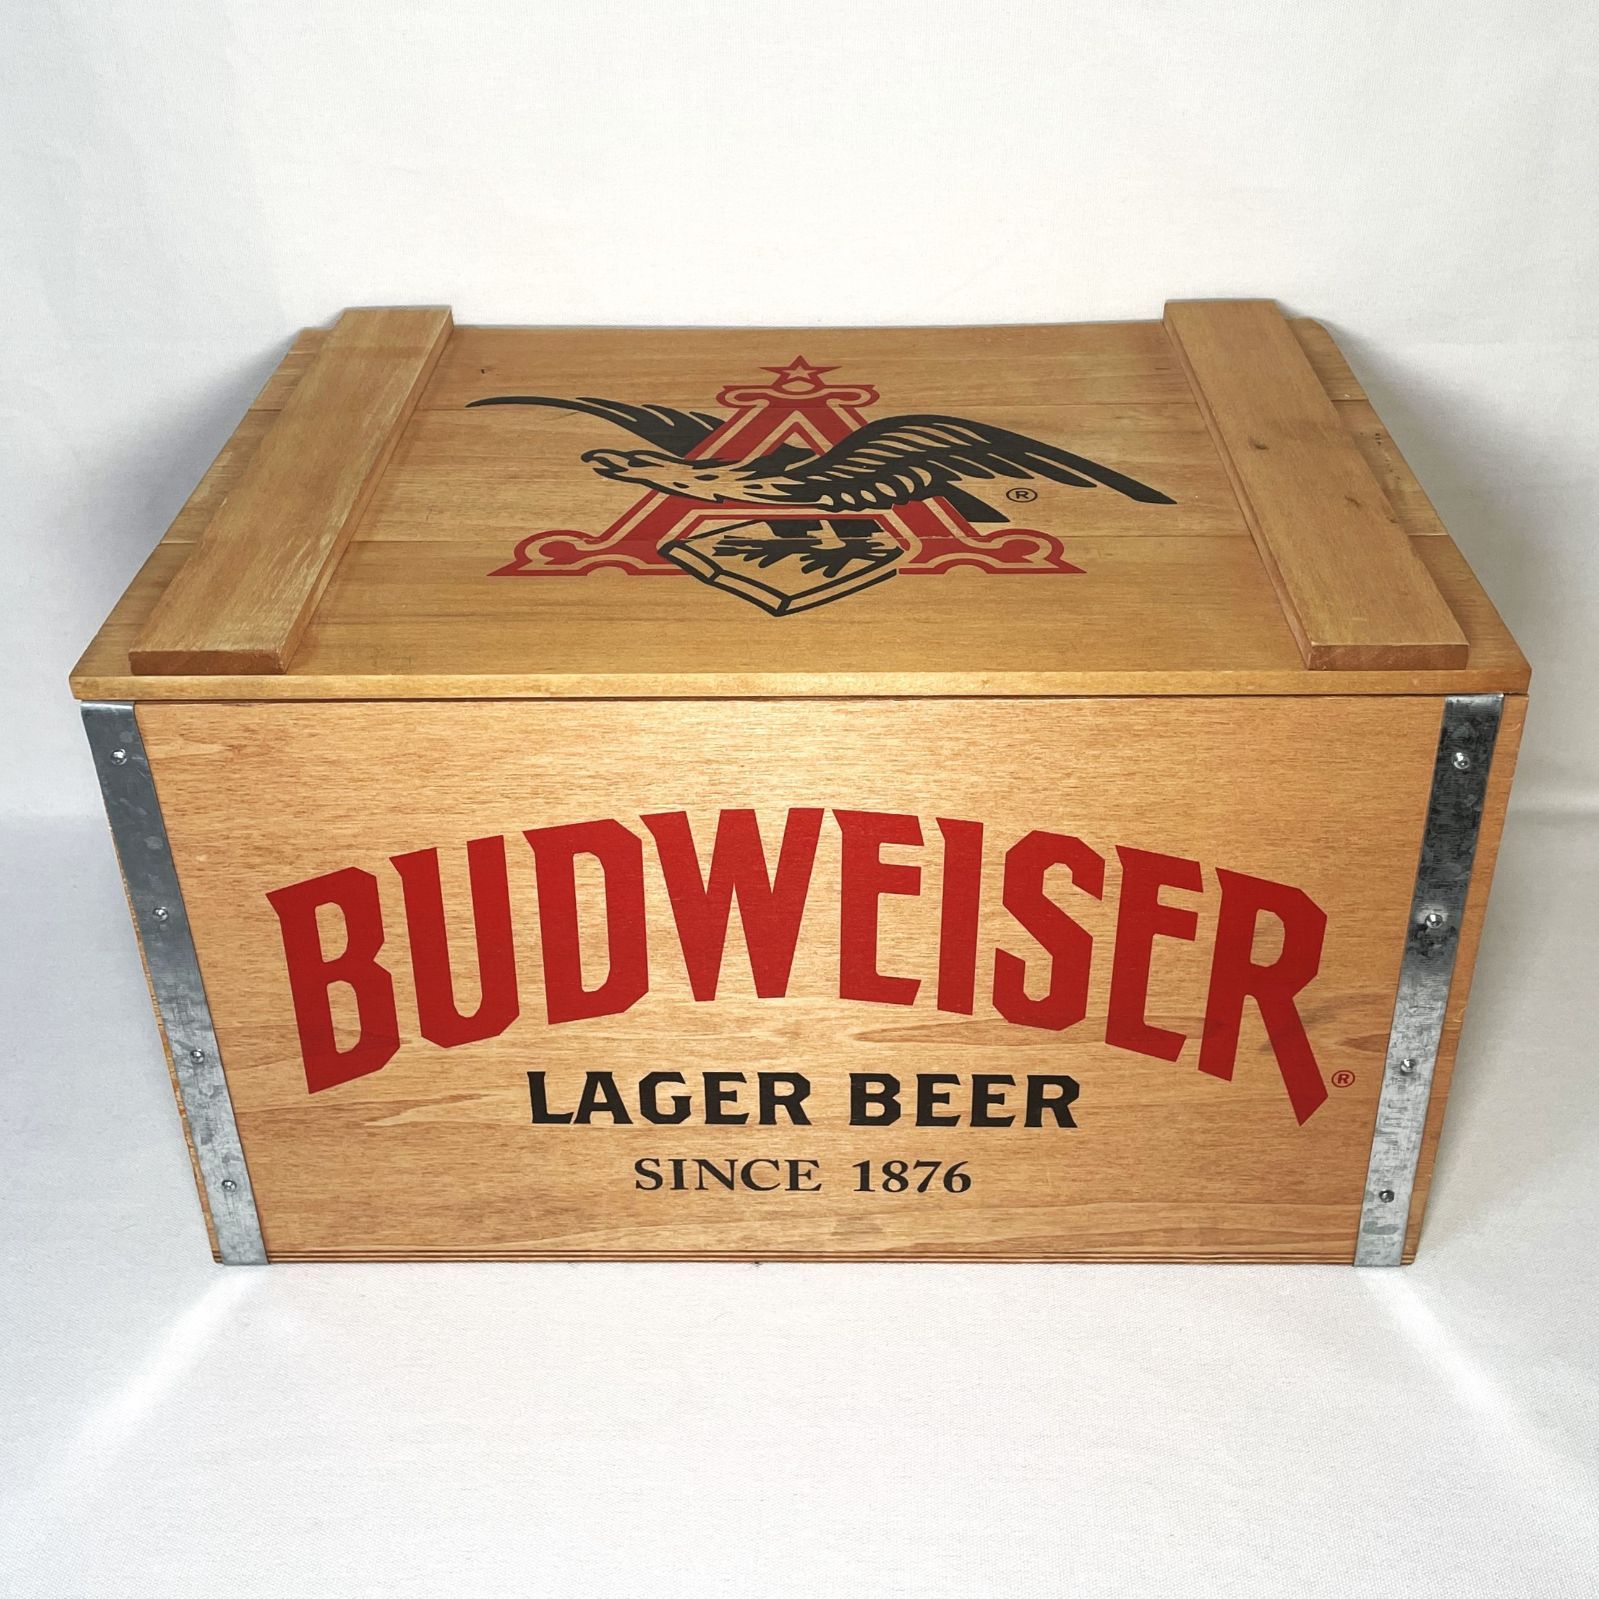 Budweiser Wooden Crate Limited Edition バドワイザー ウッドボックス